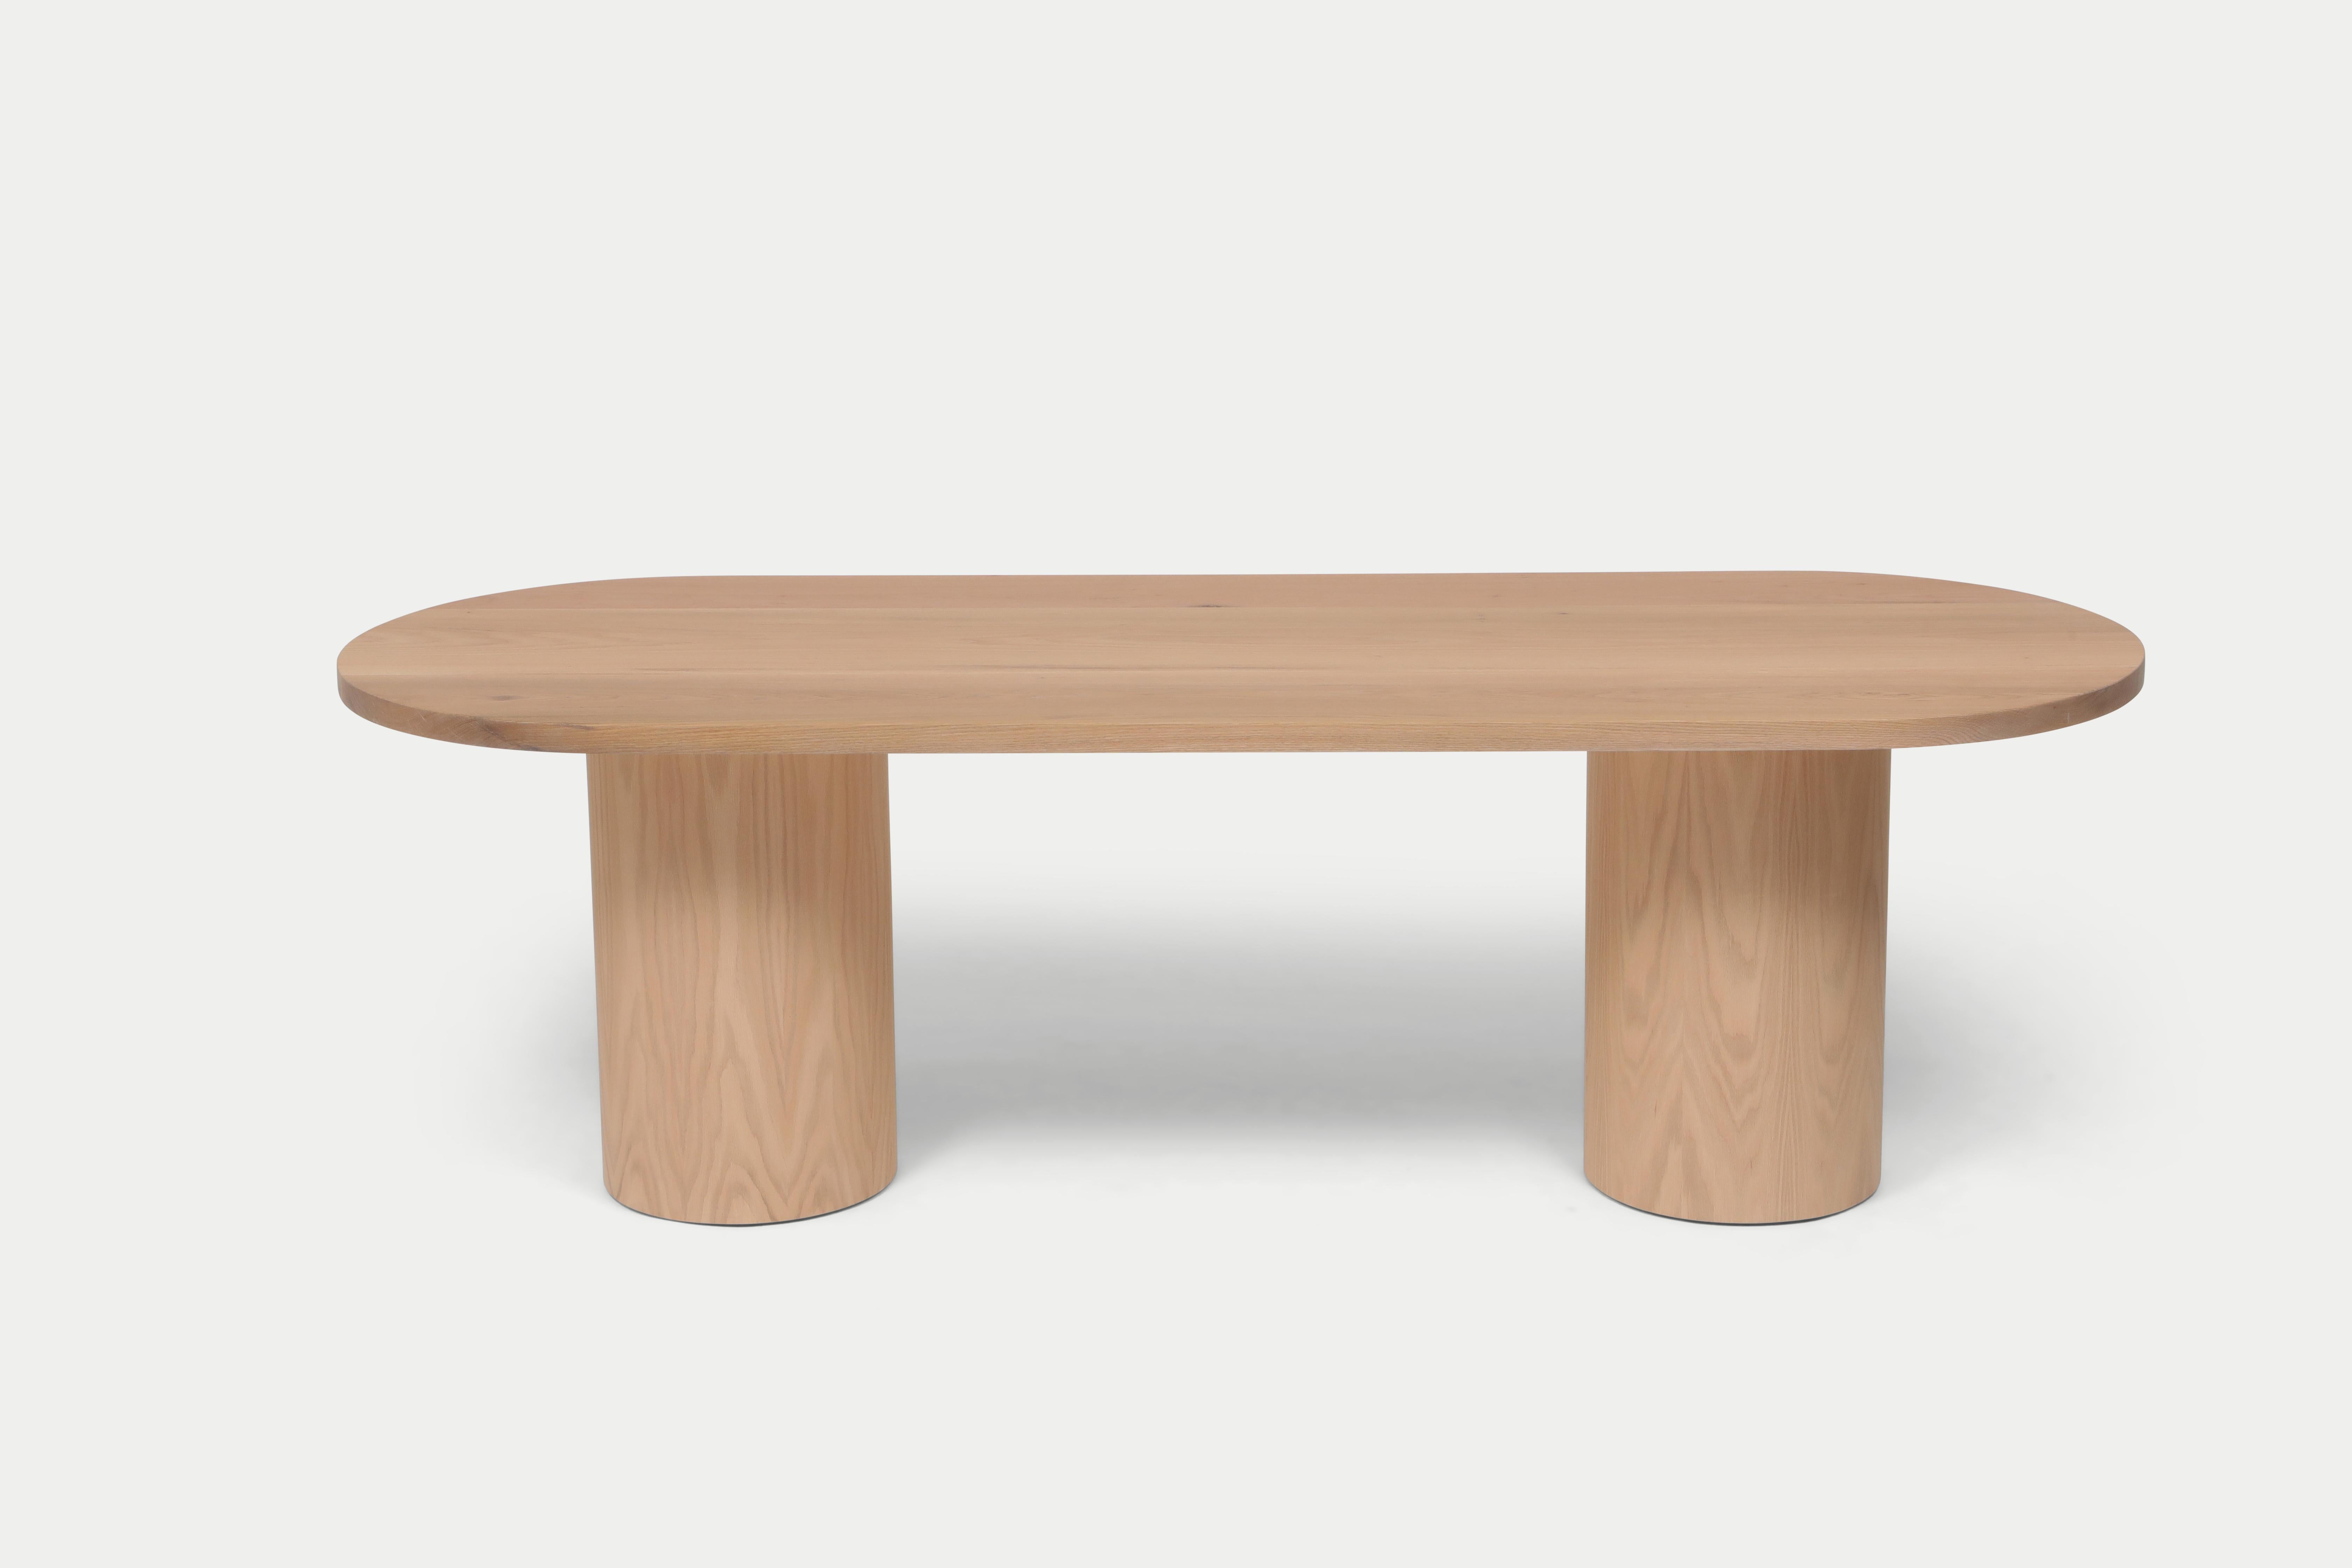 Our cylinder legged dining table, initially built as a custom unit for a client, is now added into Klein Agency's 'Klein Home' collection. Designed and manufactured locally, just minutes away from our studio, the table's focus remain simplicity and